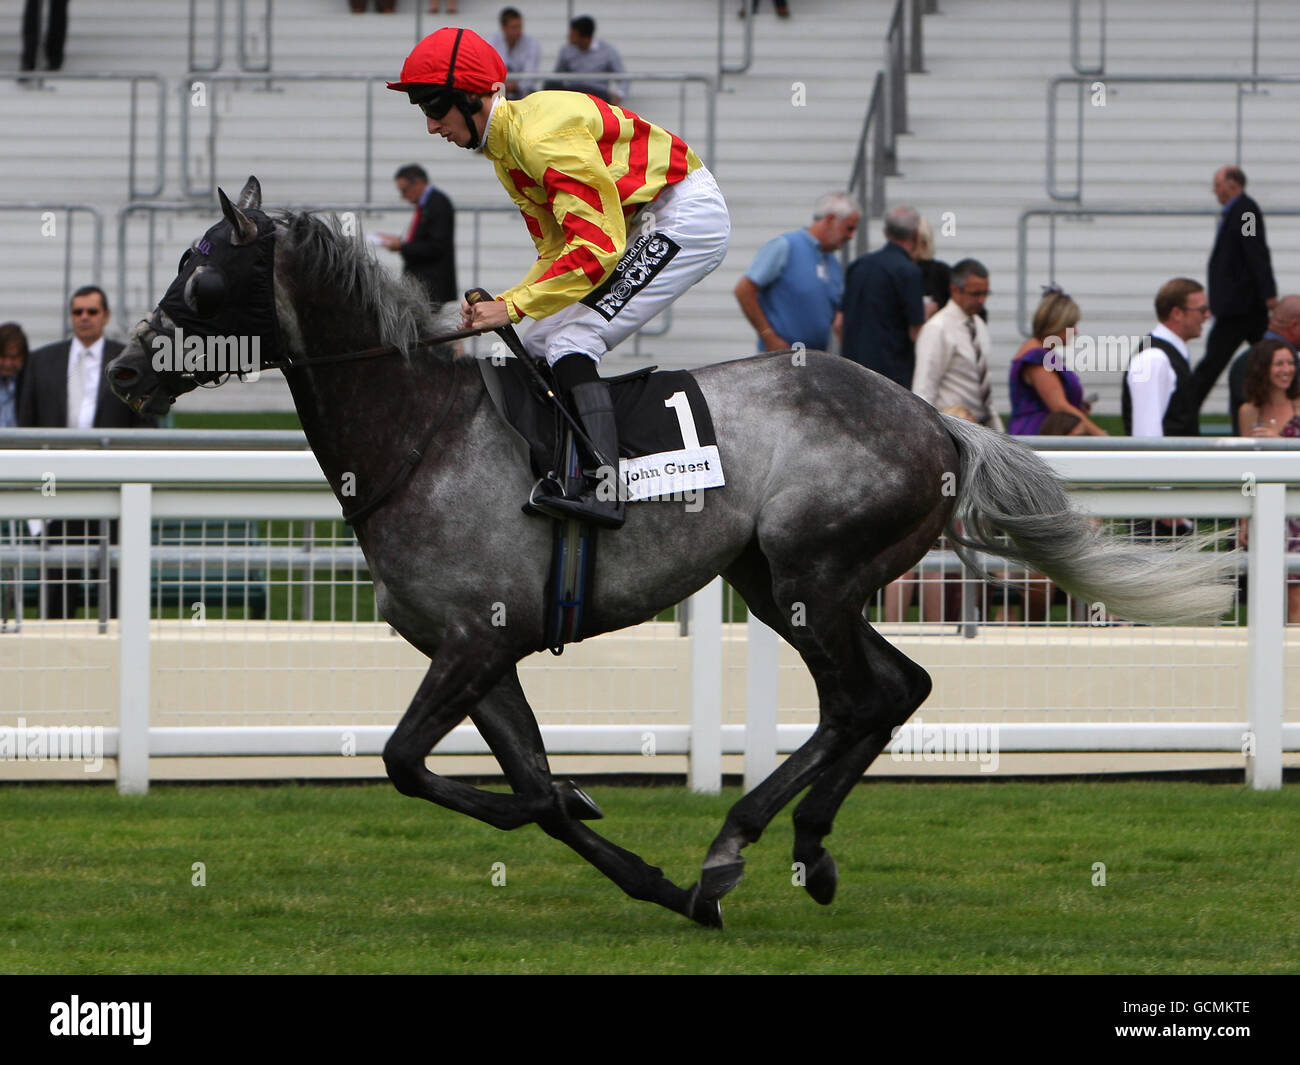 Jockey George Baker on Centennial goes to post in the John Guest Brown Jack Stakes Stock Photo